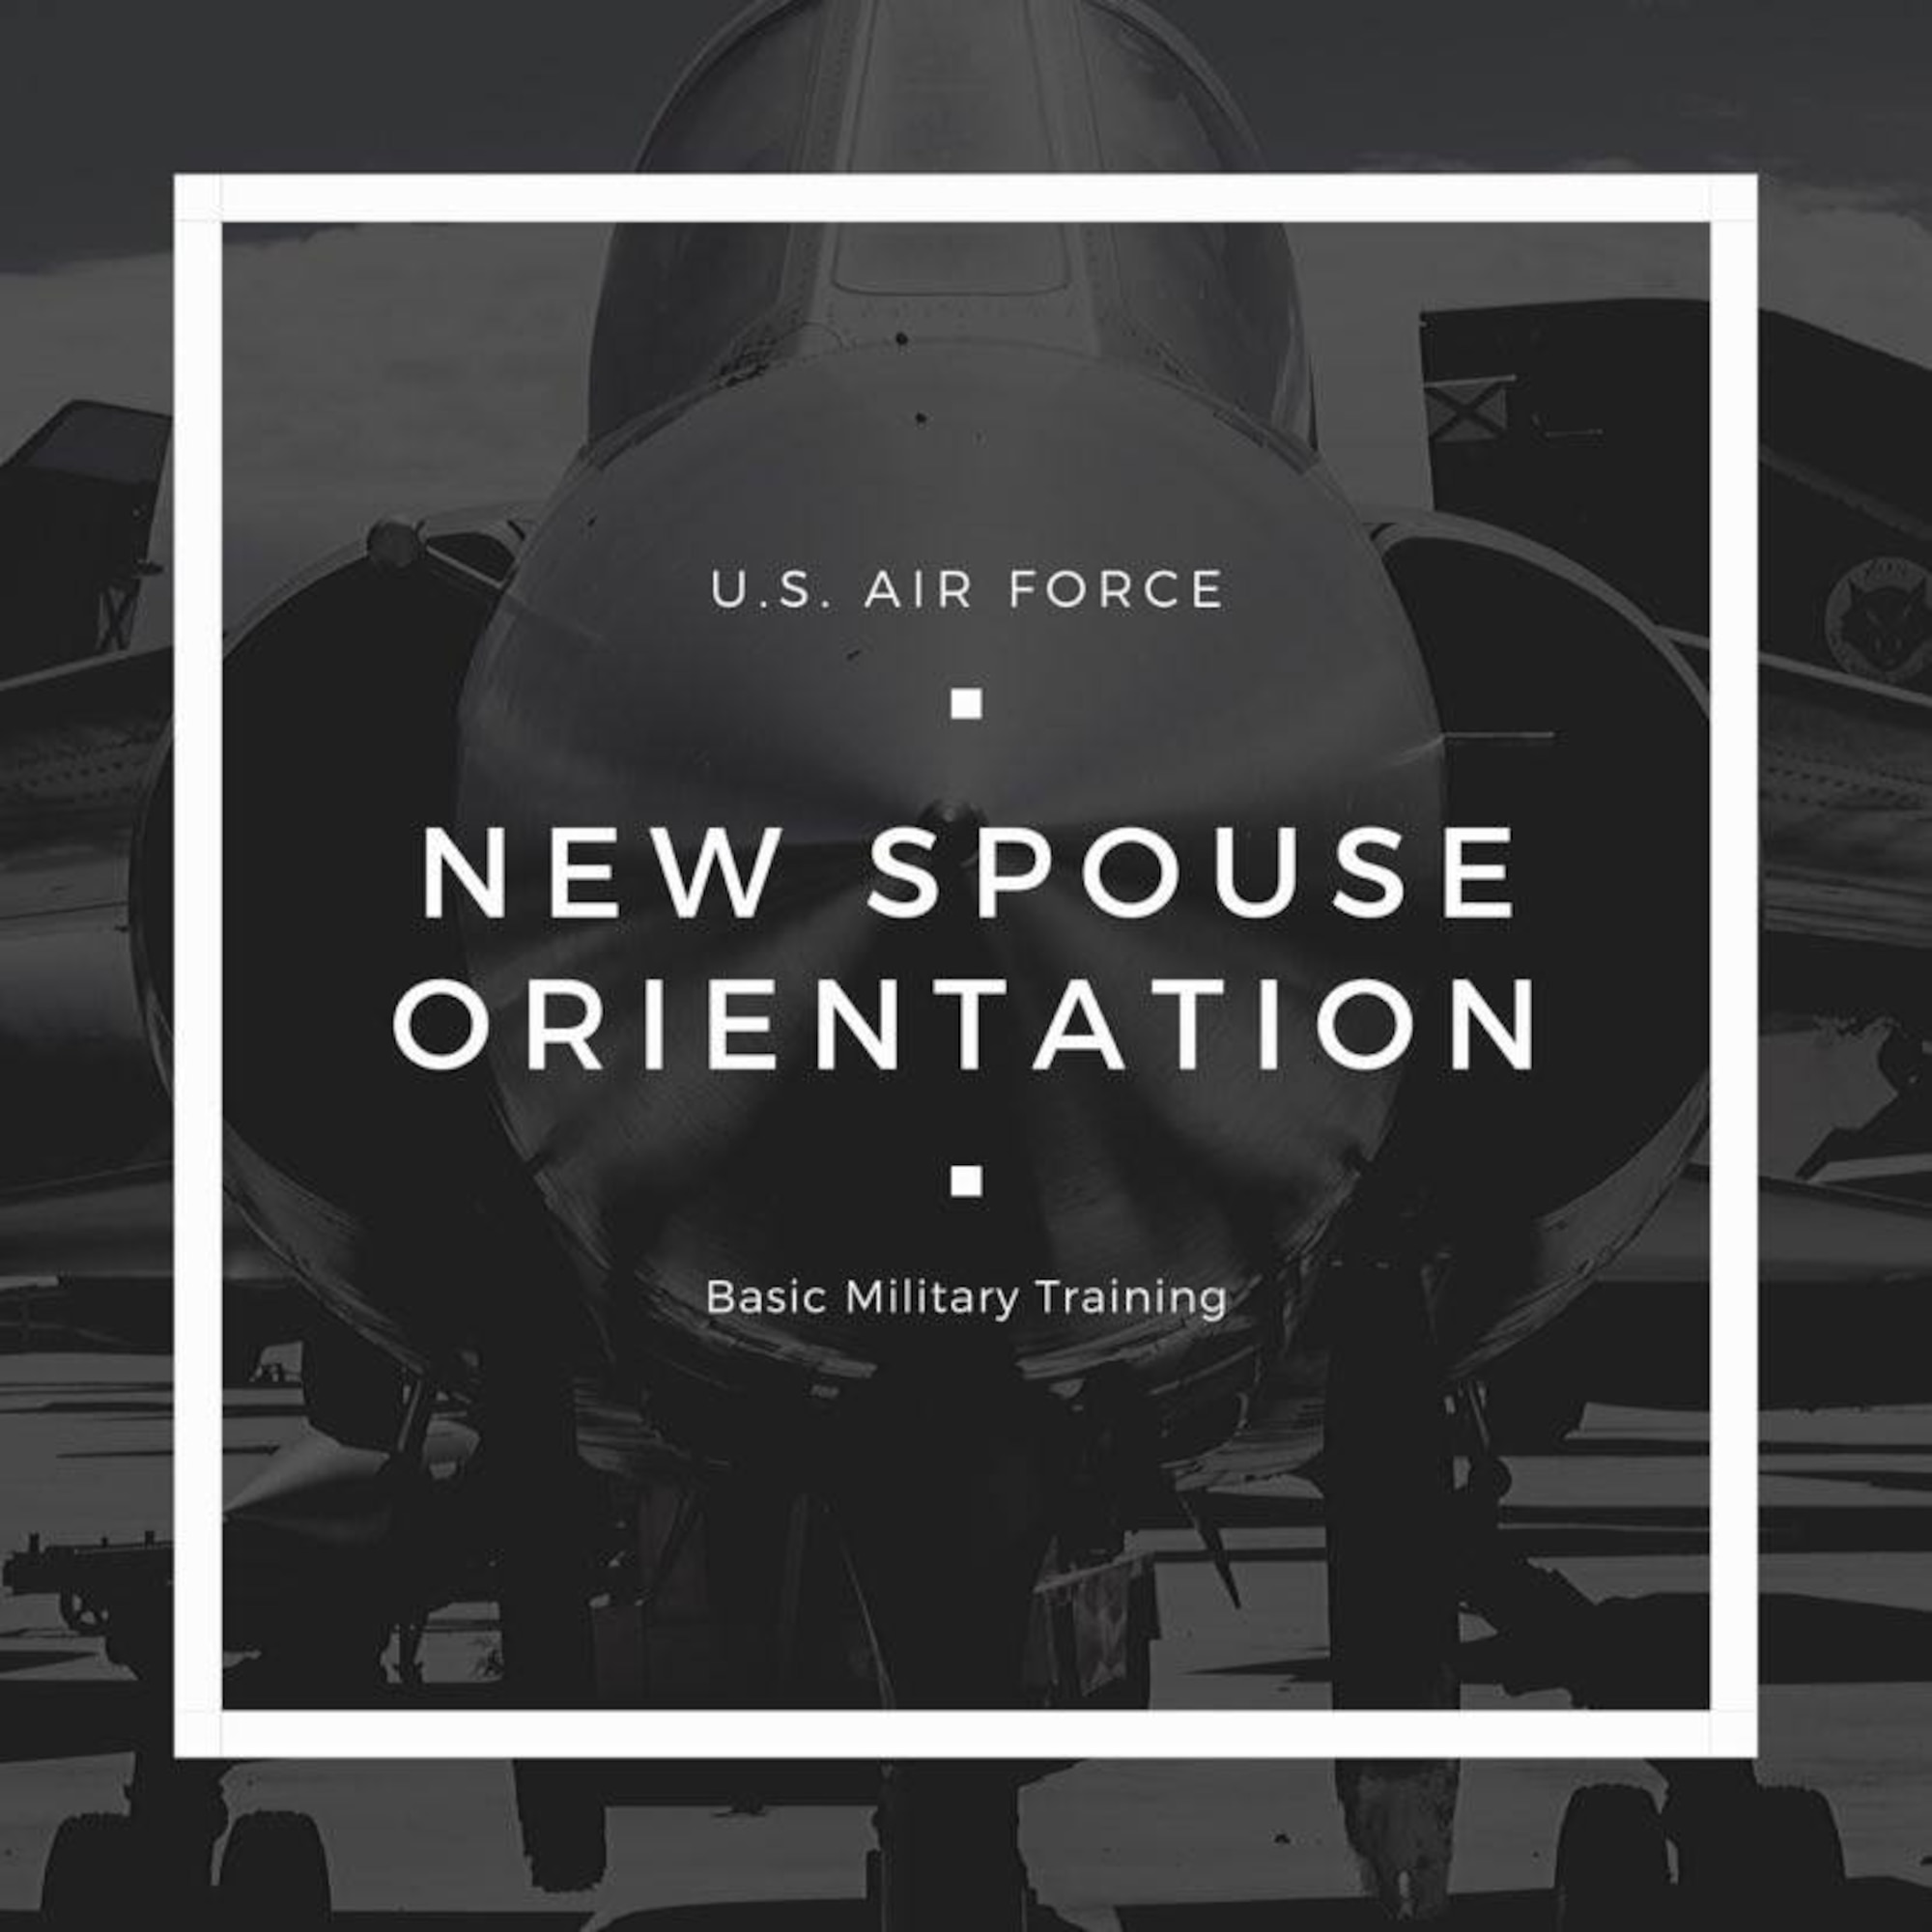 U.S. Air Force Basic Military Training New Spouse Orientation resource